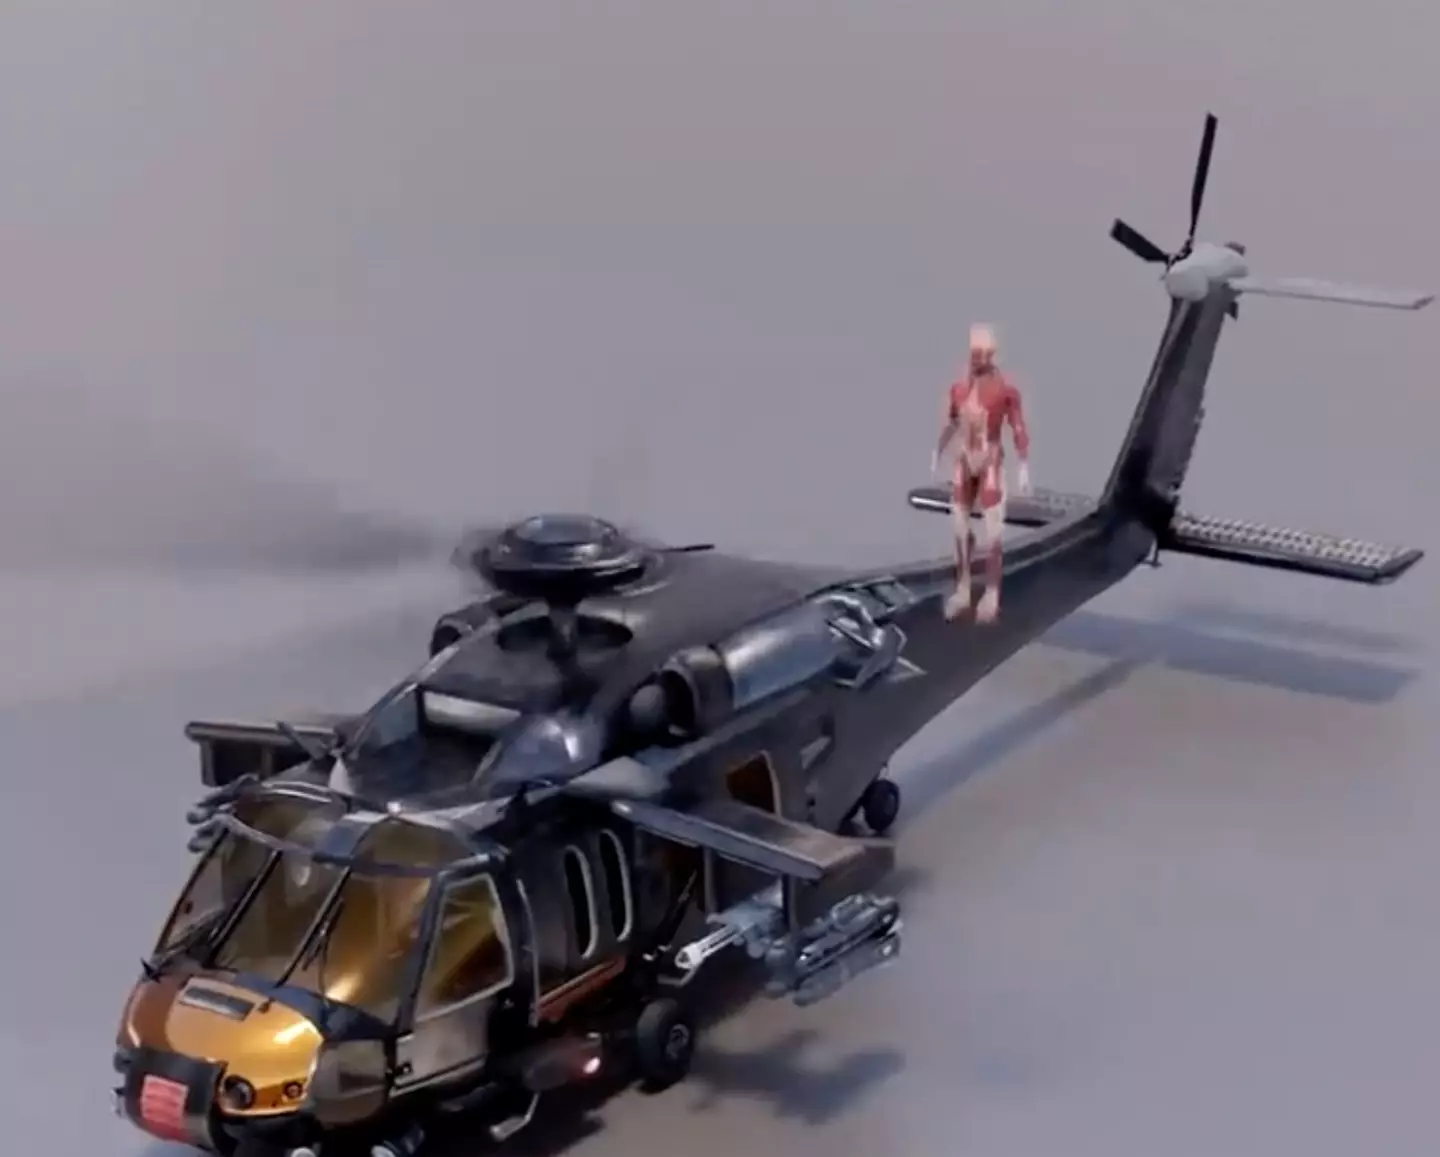 The simulation shows what happens to the human body when it falls through helicopter blades.